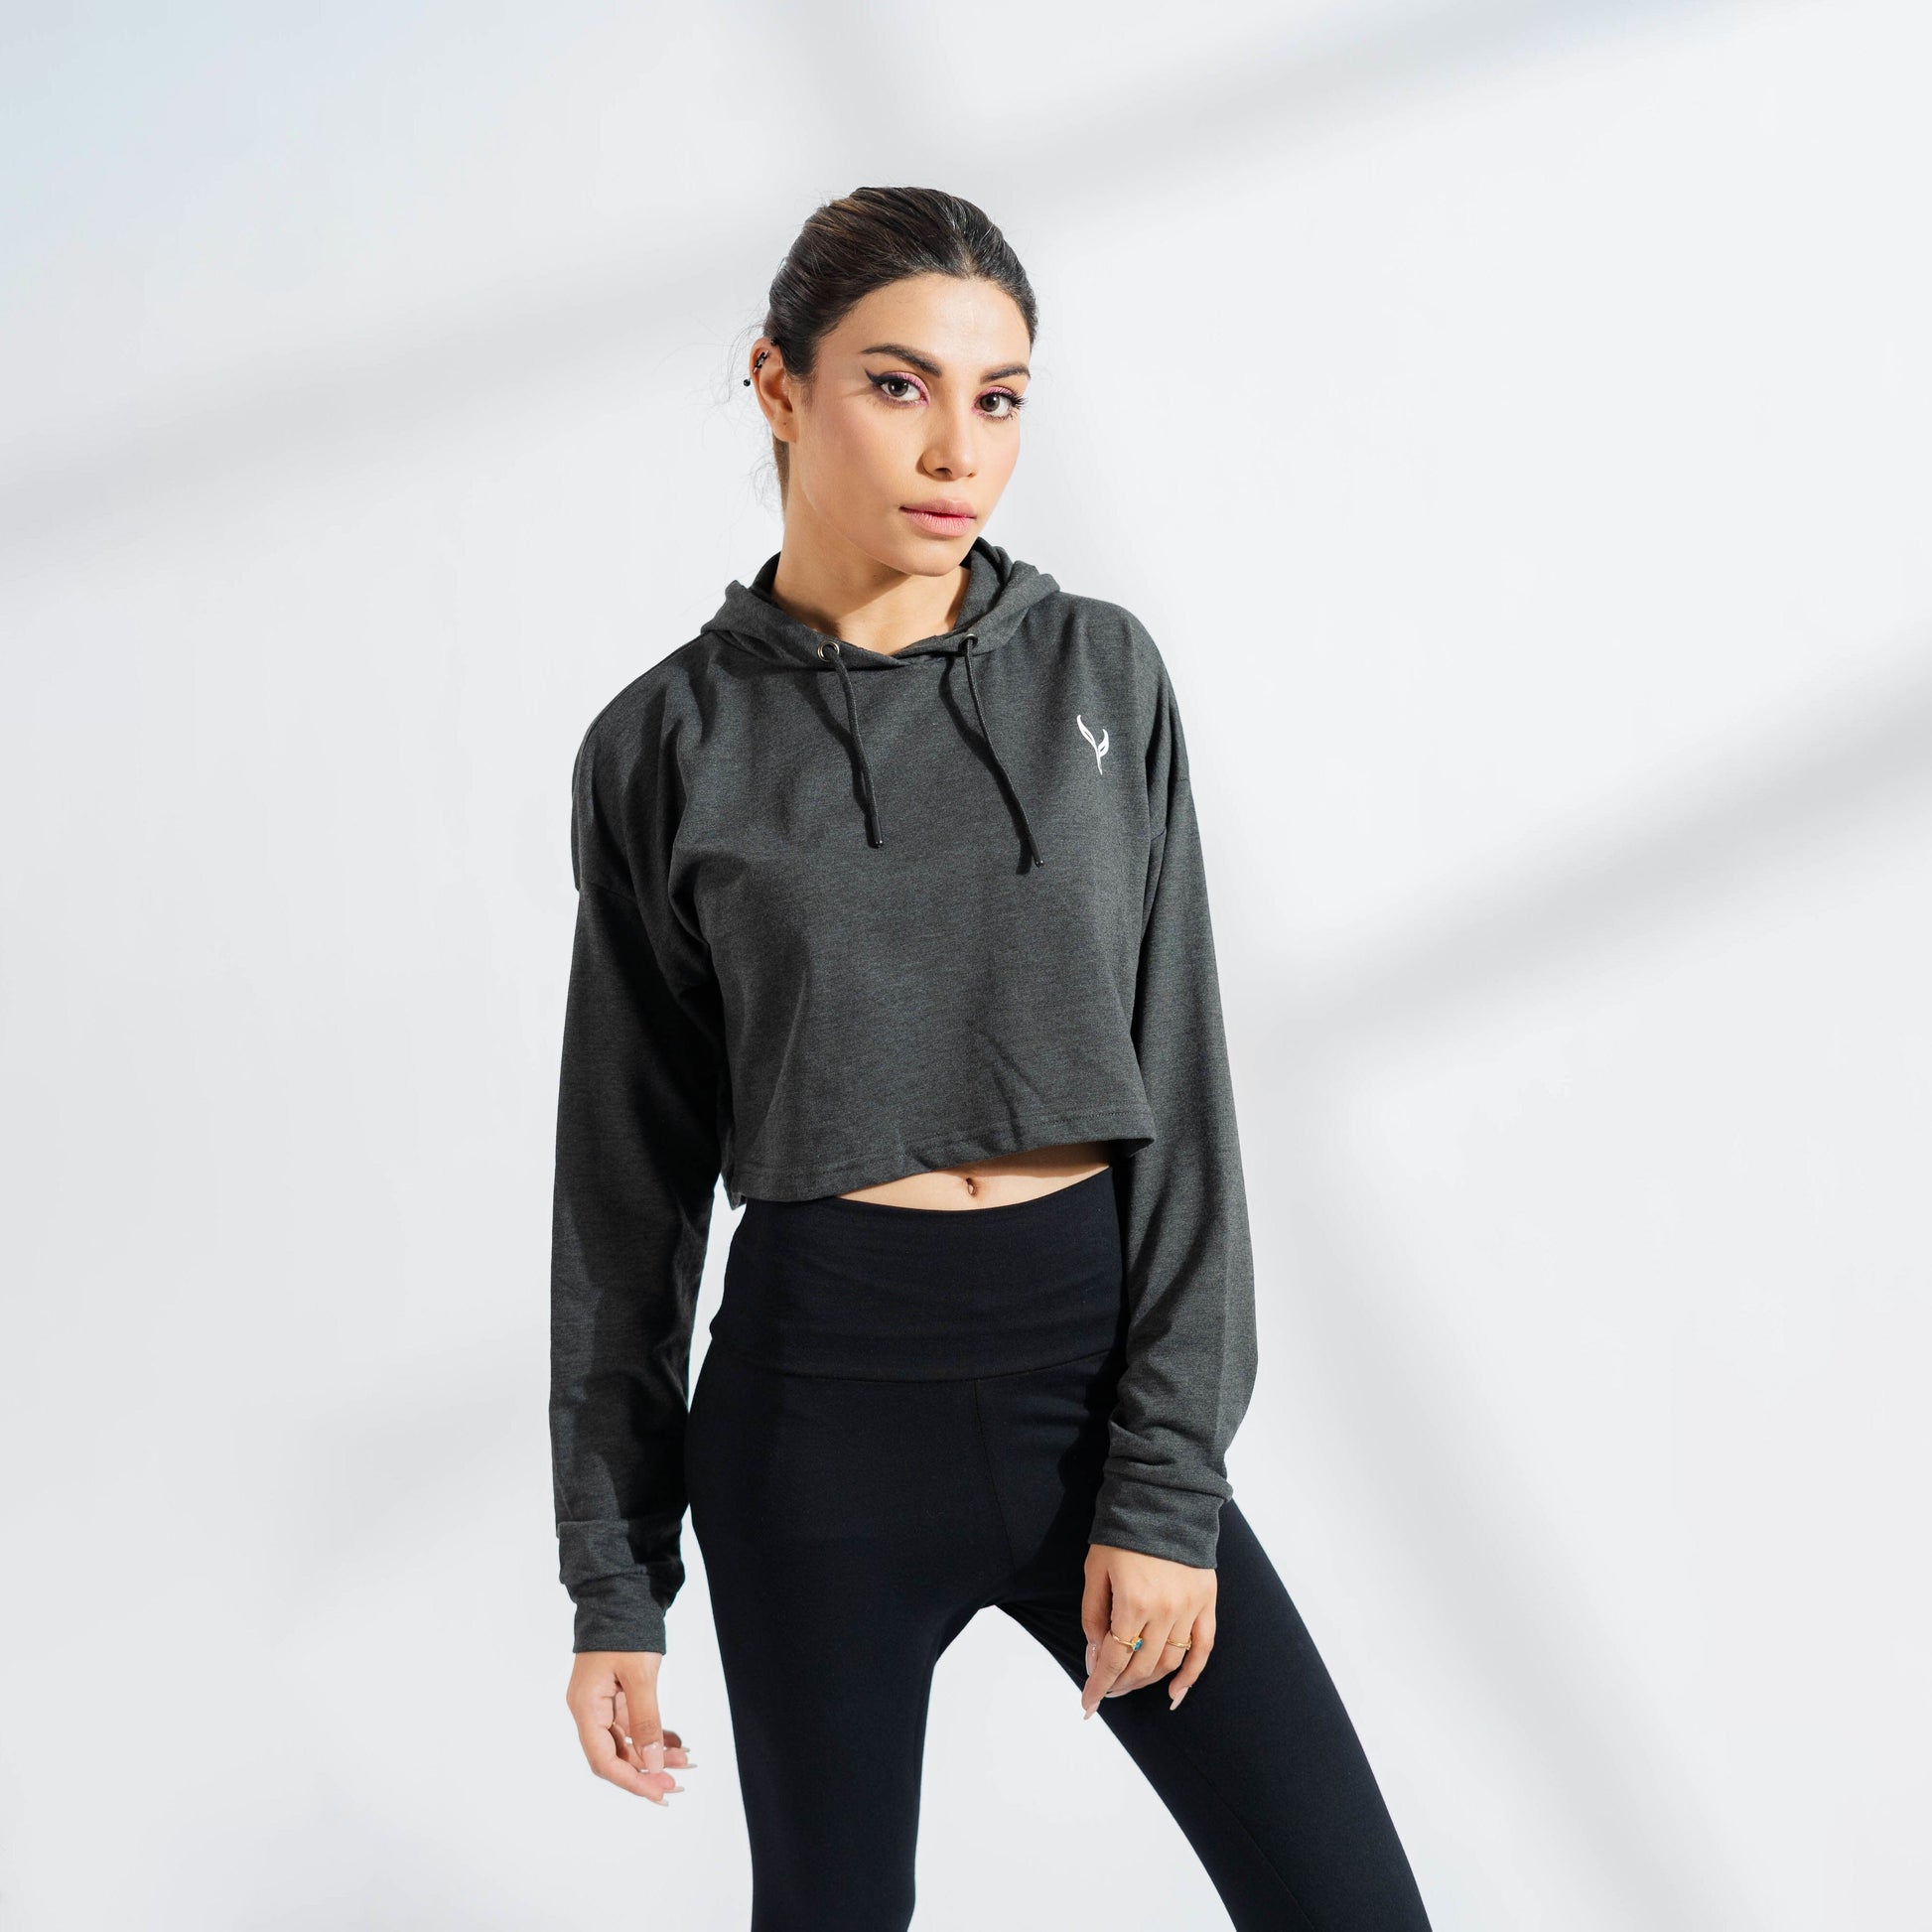 Polo Athletica Women's Hooded Activewear Terry Crop Top Women's Pullover Hoodie Polo Republica Charcoal XS 